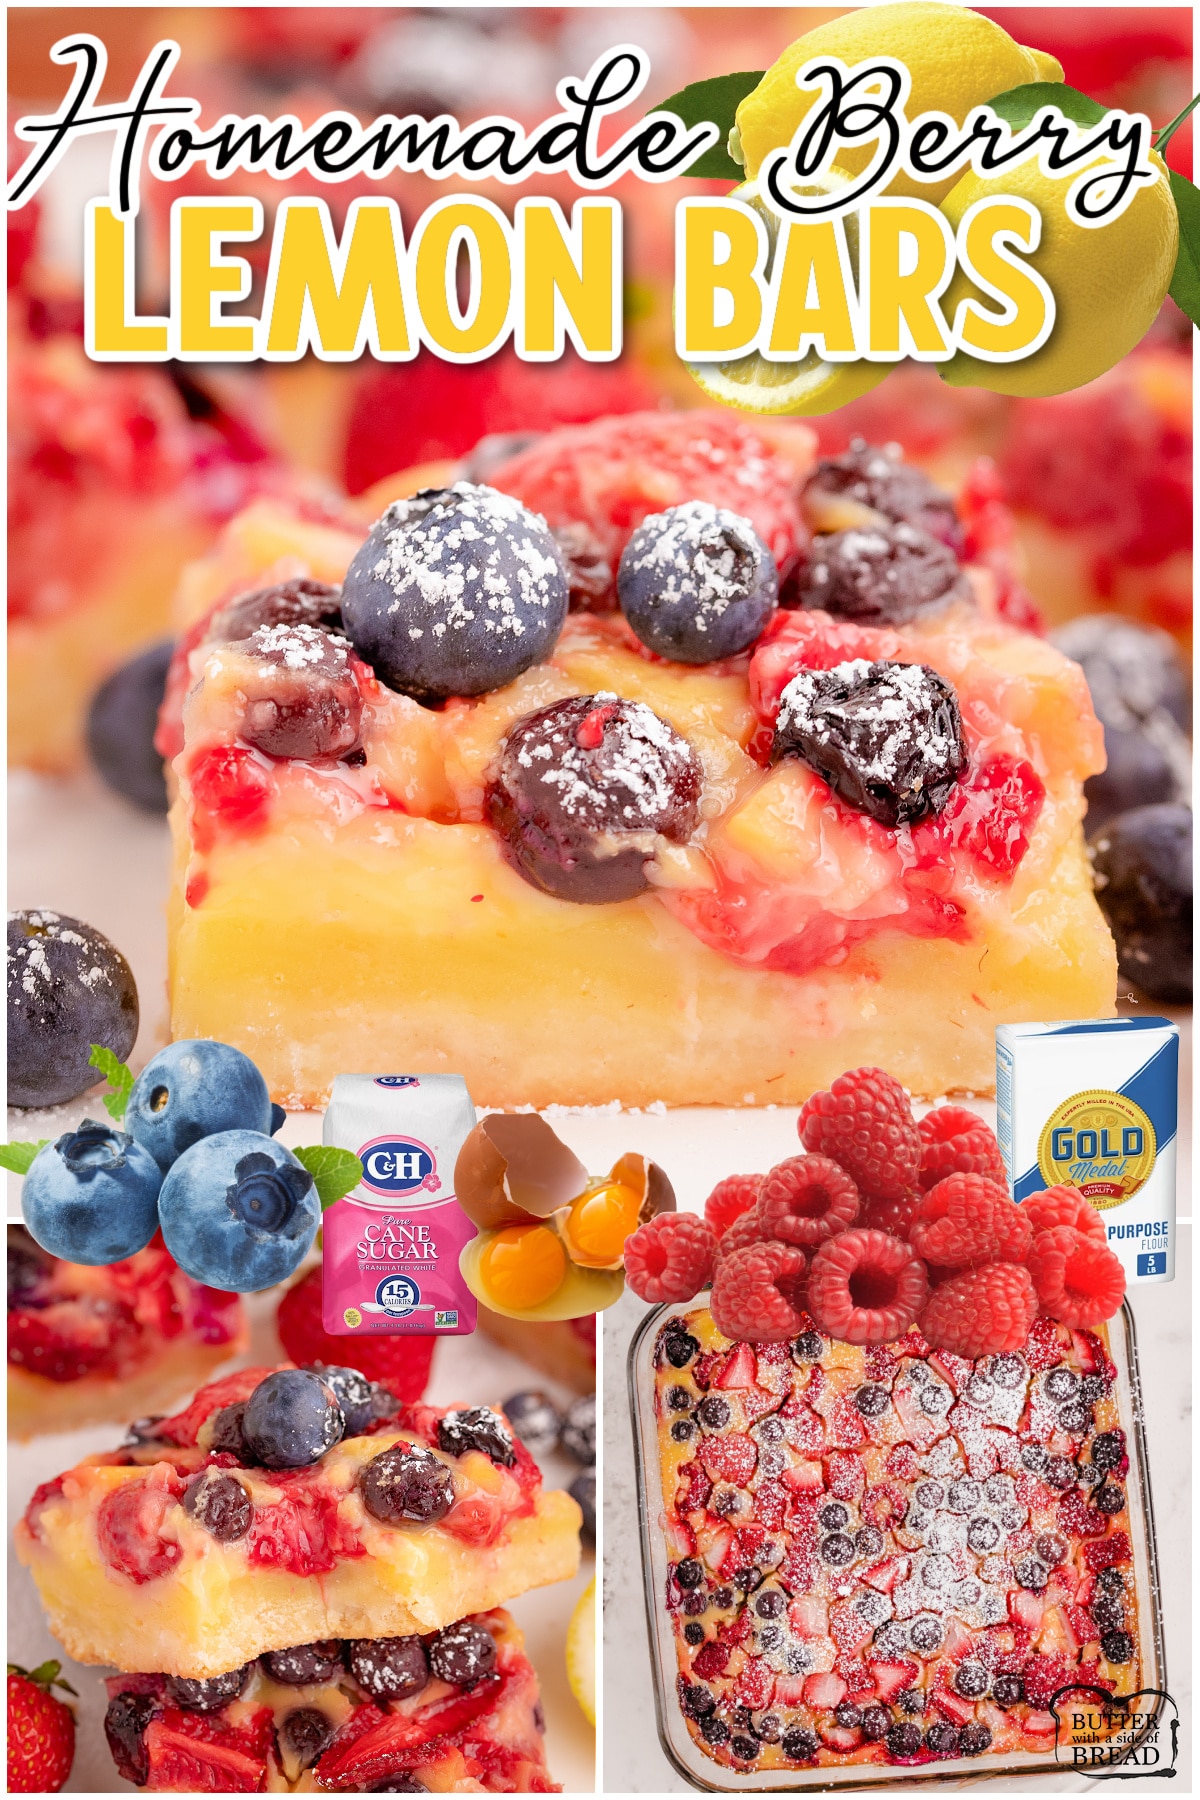 Berry Lemon Bars are a delightful lemon dessert with fresh berries!  The fresh fruit in this lemon bar recipe pairs beautifully with the creamy tart filling for unique, flavorful treat.